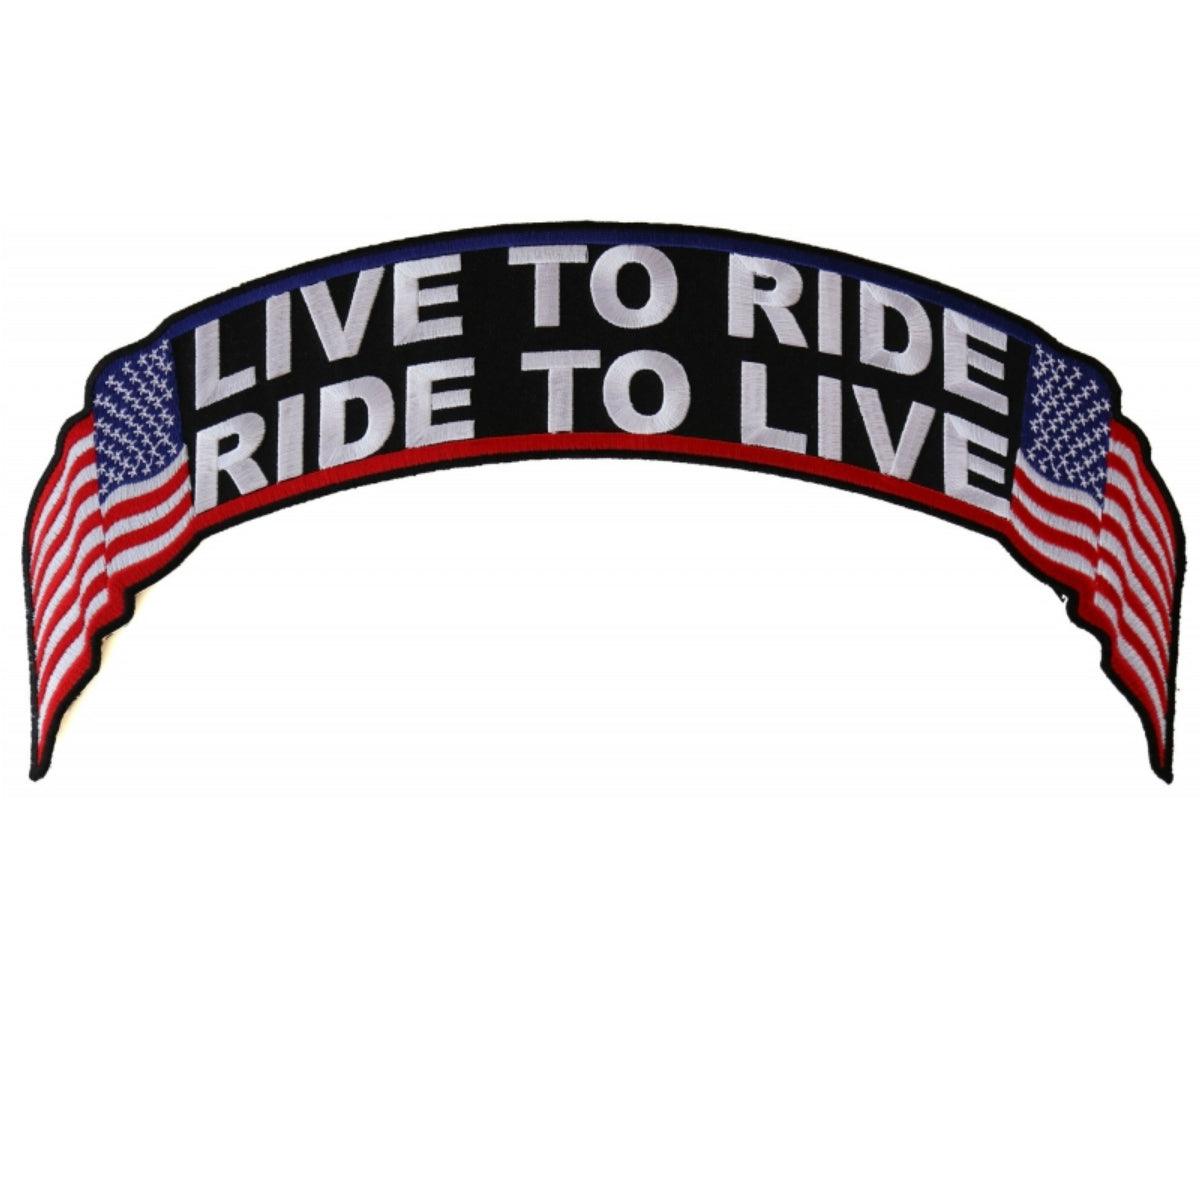 Daniel Smart Live To Ride, Ride To Live US Flag Biker Embroidered Iron On Back Patch, 12 x 2.5 inches - American Legend Rider